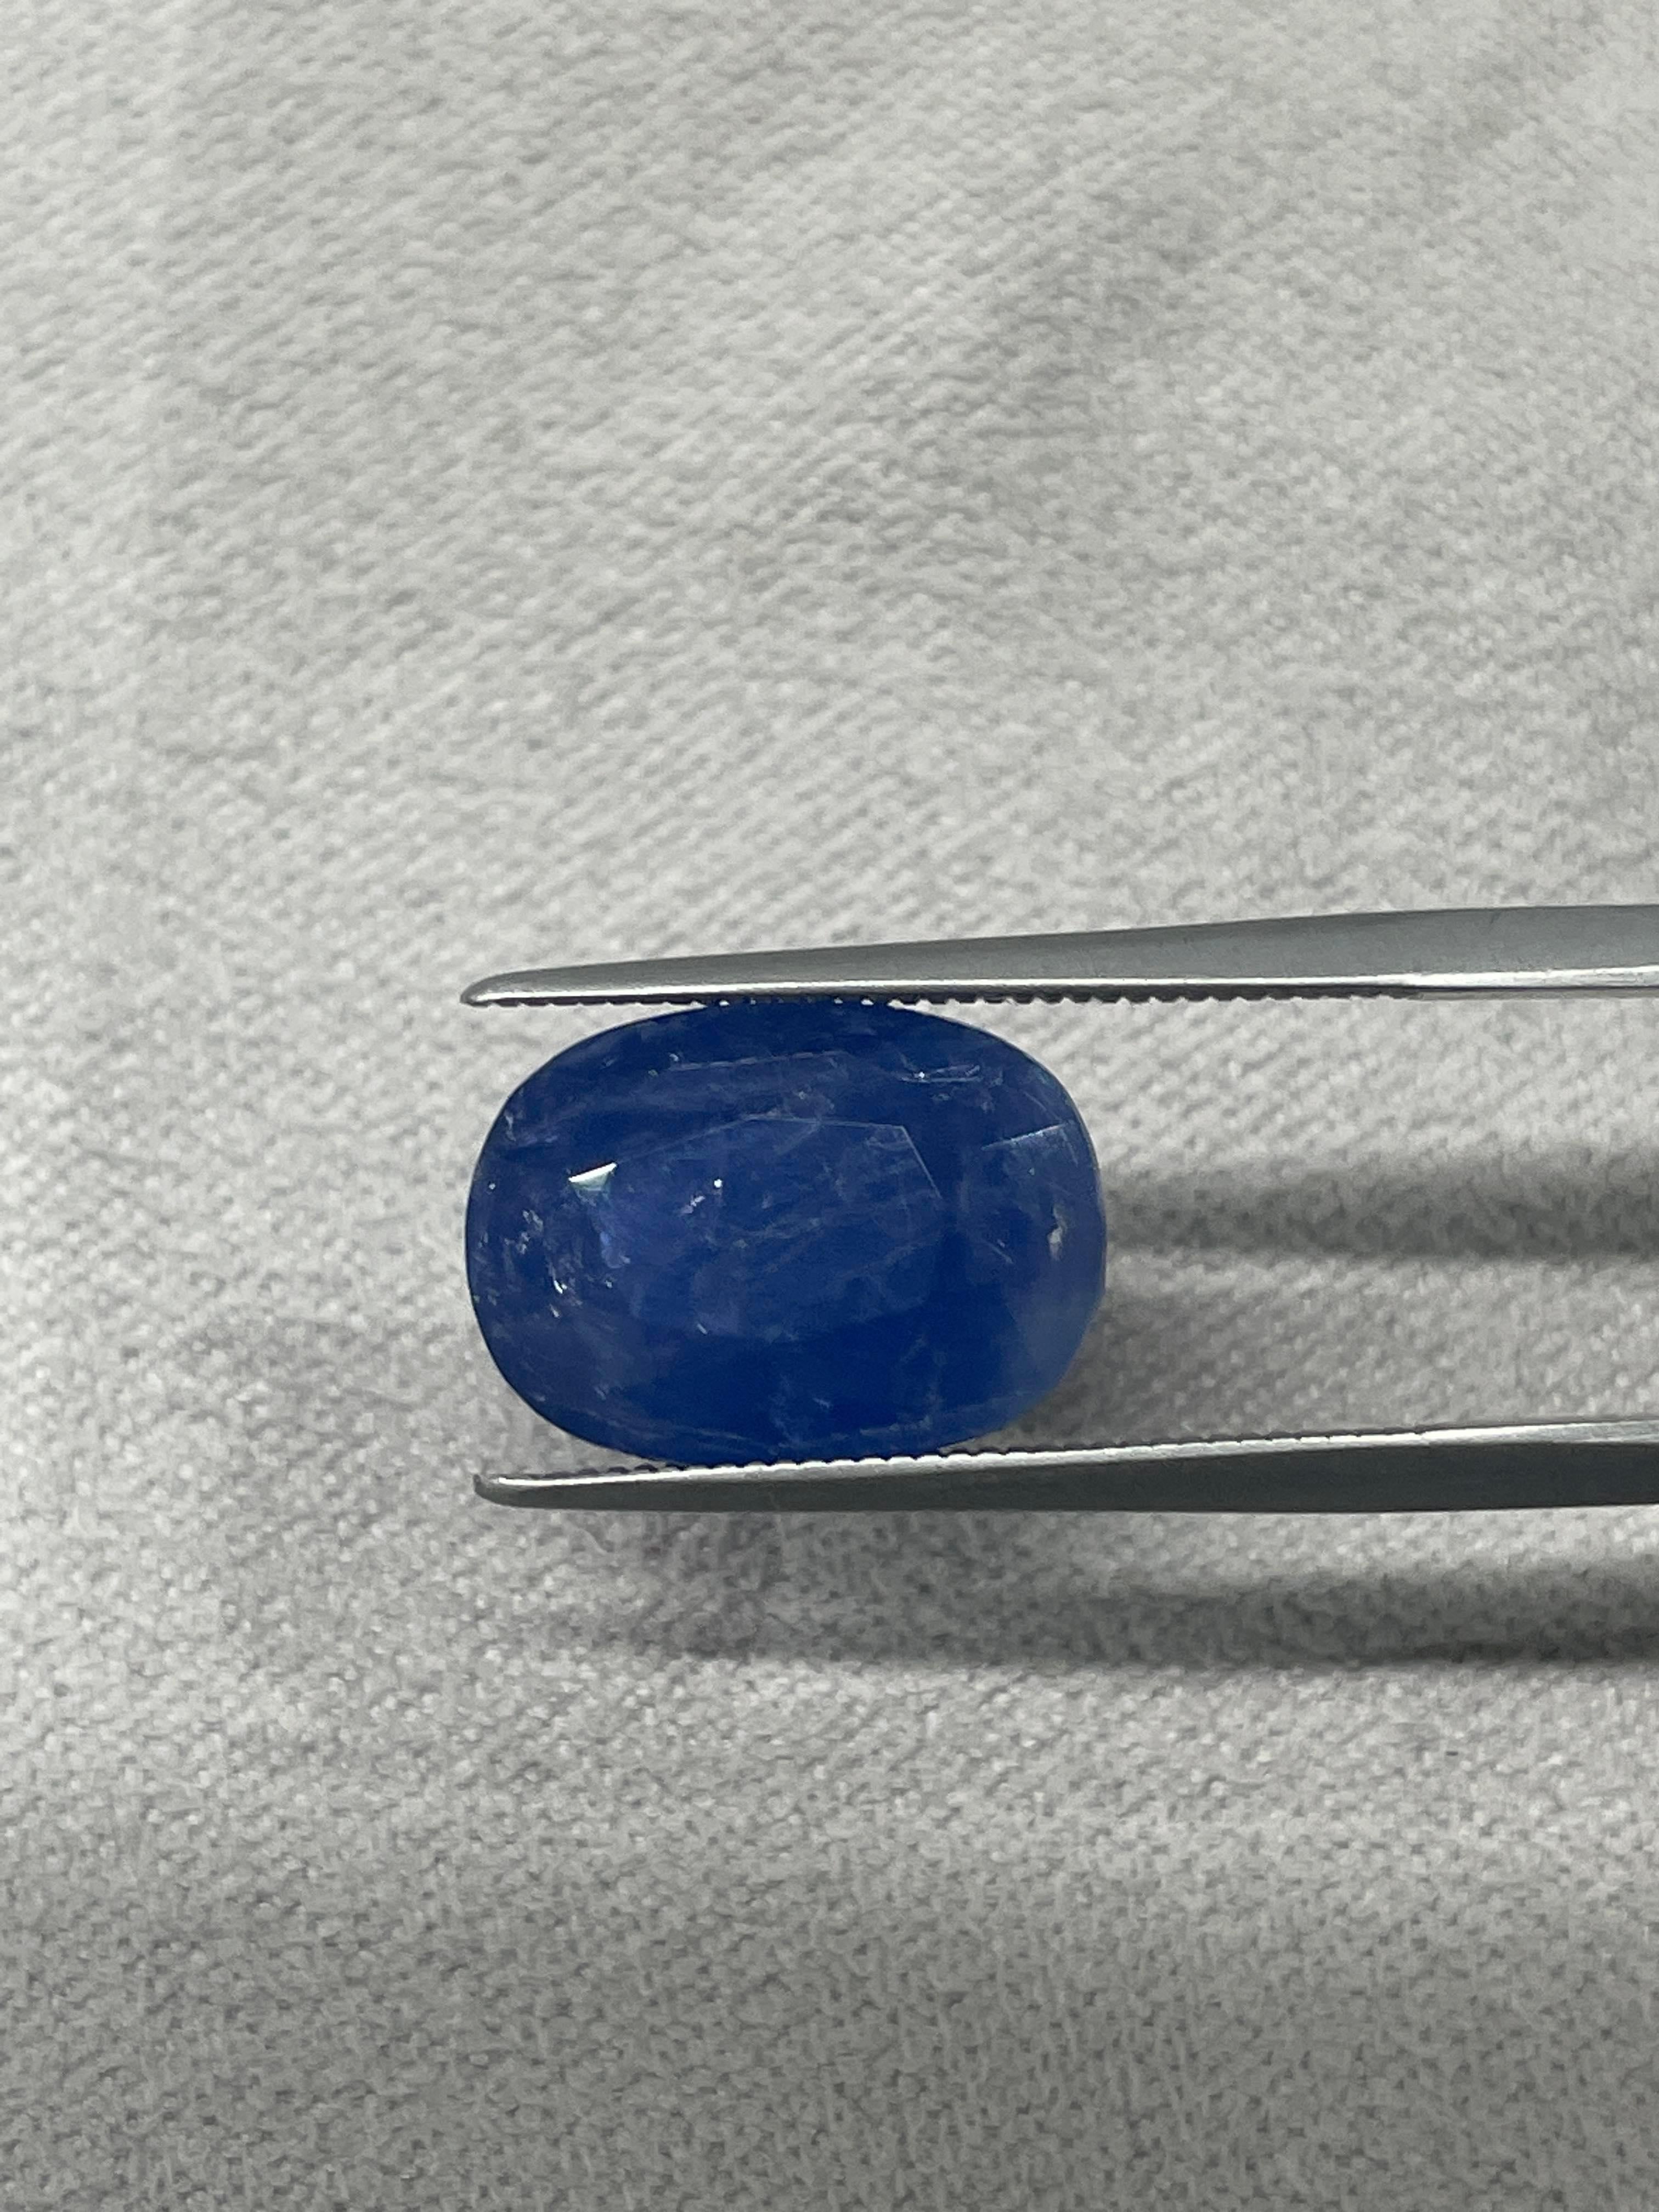 A Burmese blue sapphire of 9 carats is a rare and valuable gemstone. Burmese sapphires are known for their deep blue color, often called “royal” or “midnight” blue. They are also prized for their natural and untreated quality, as most sapphires